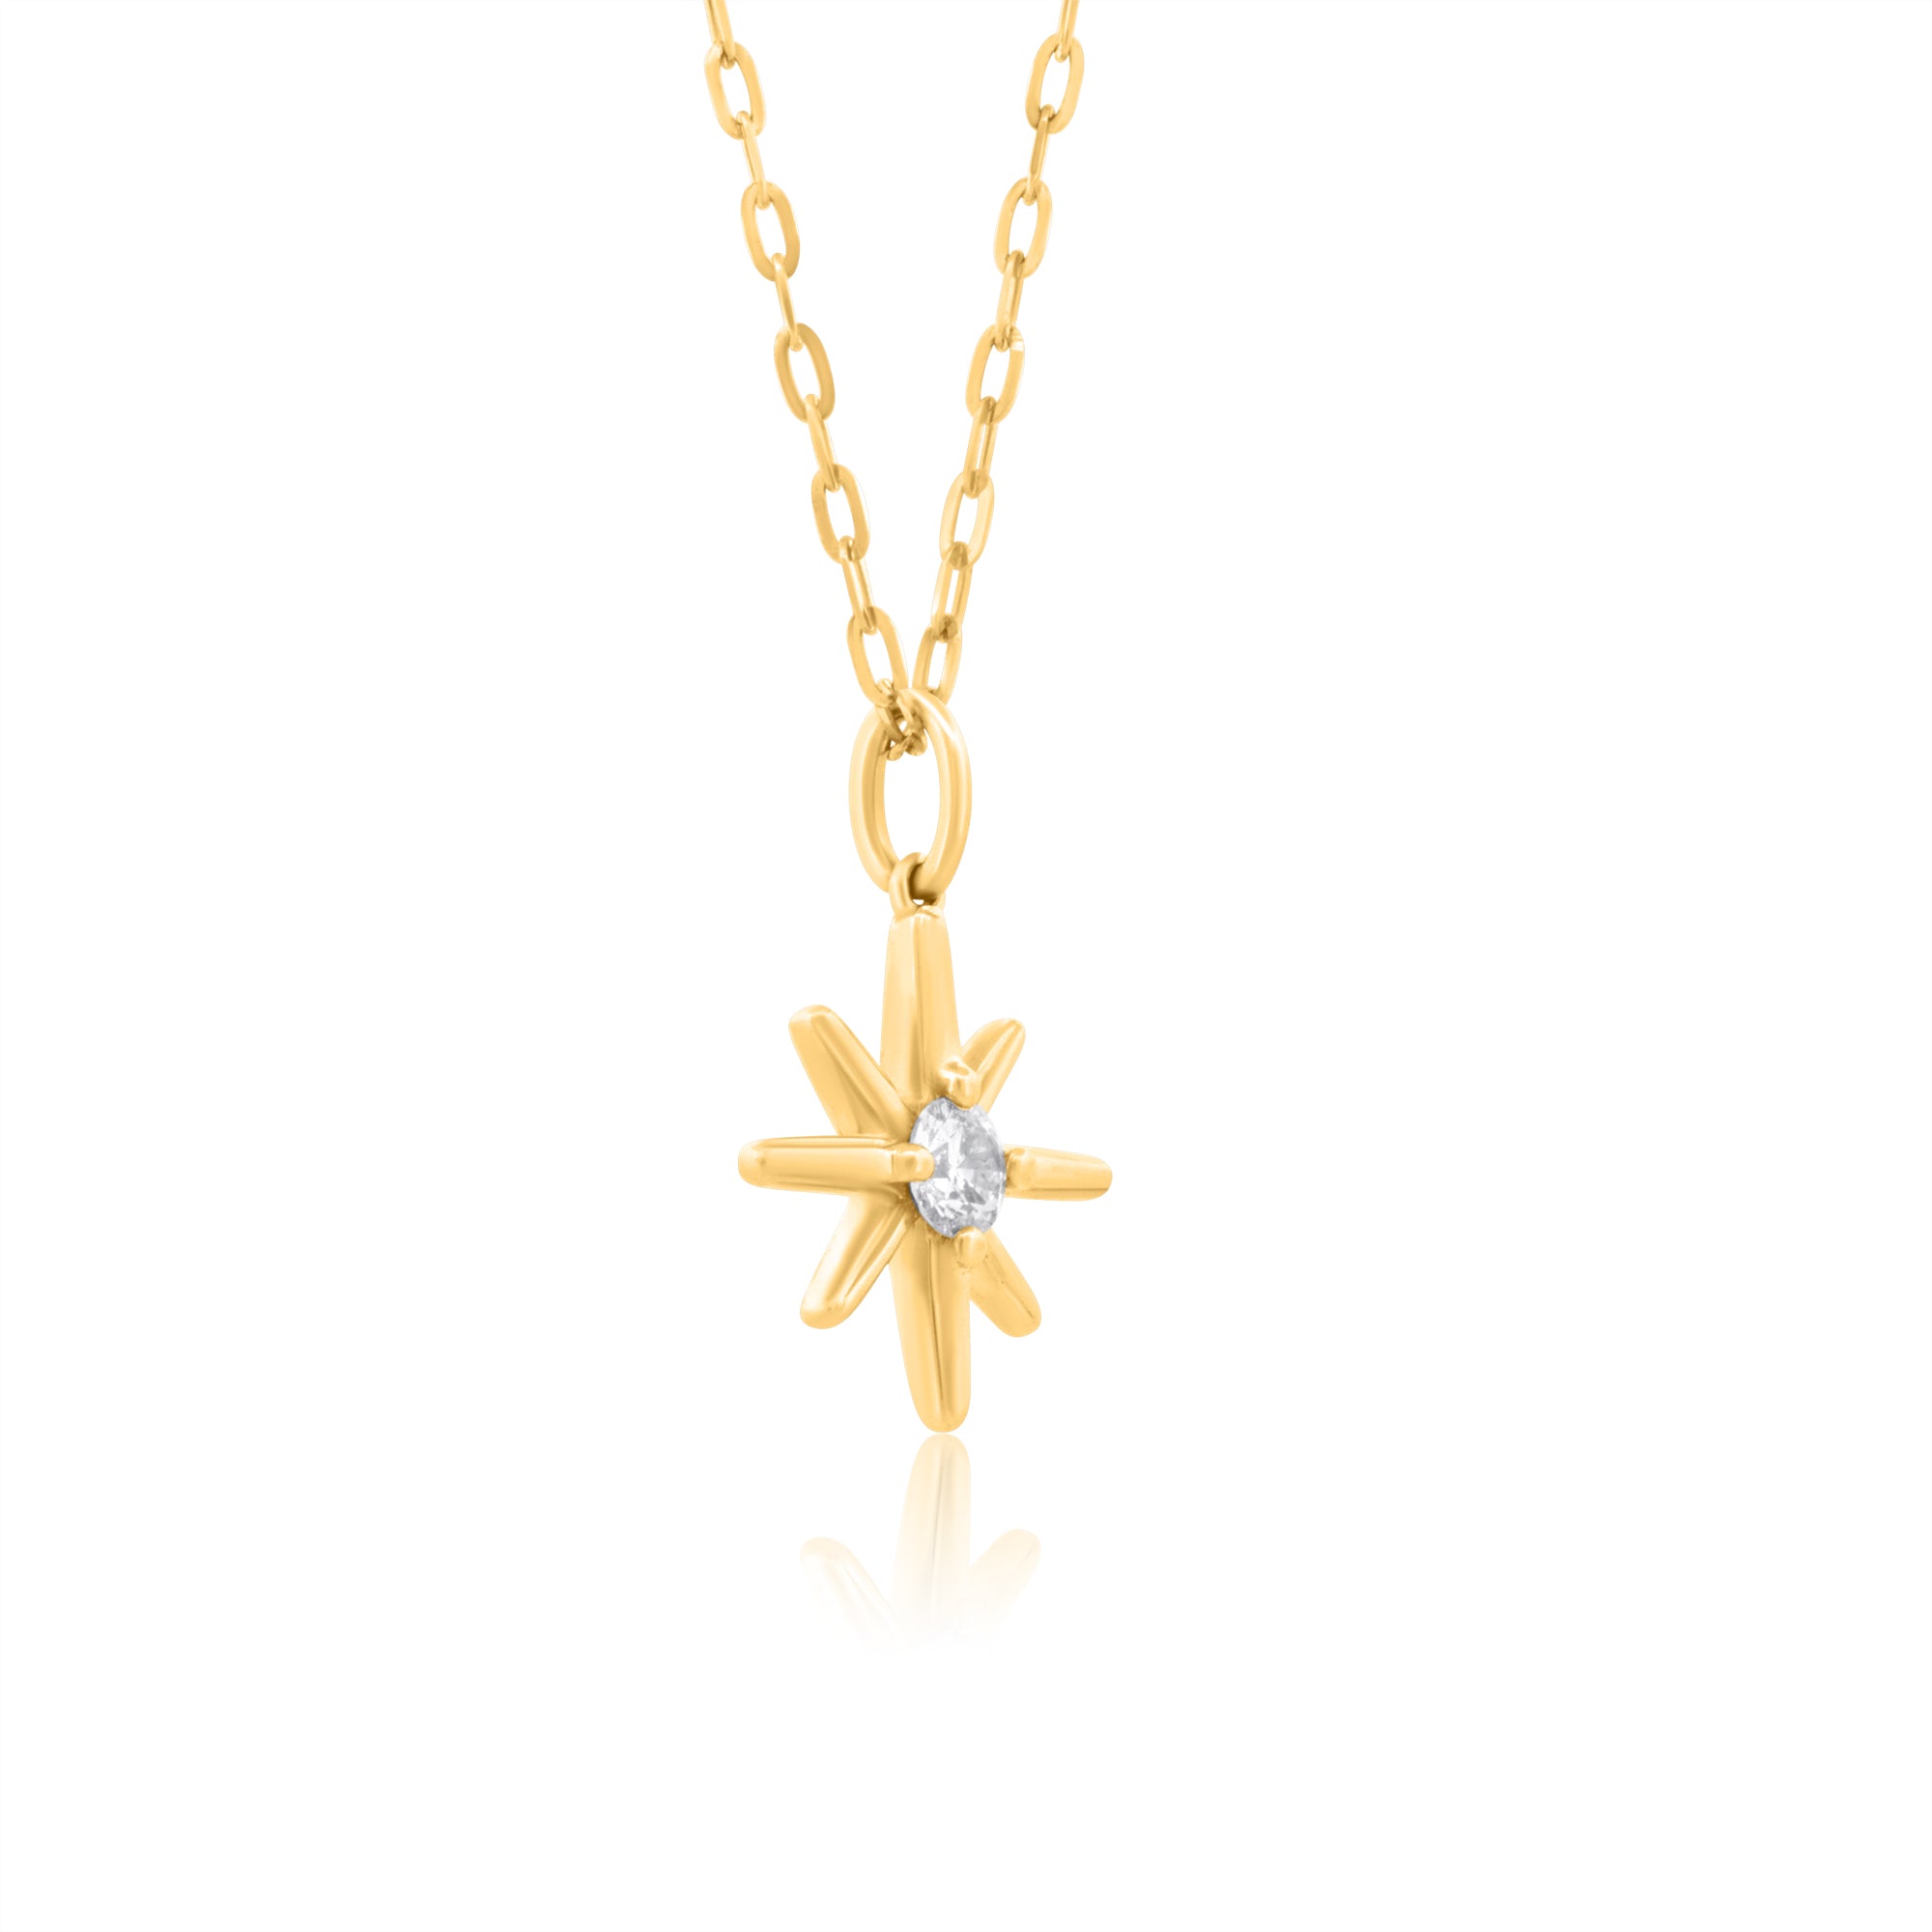 10k Yellow Gold with 0.25Ctw White Diamond North Star Necklace